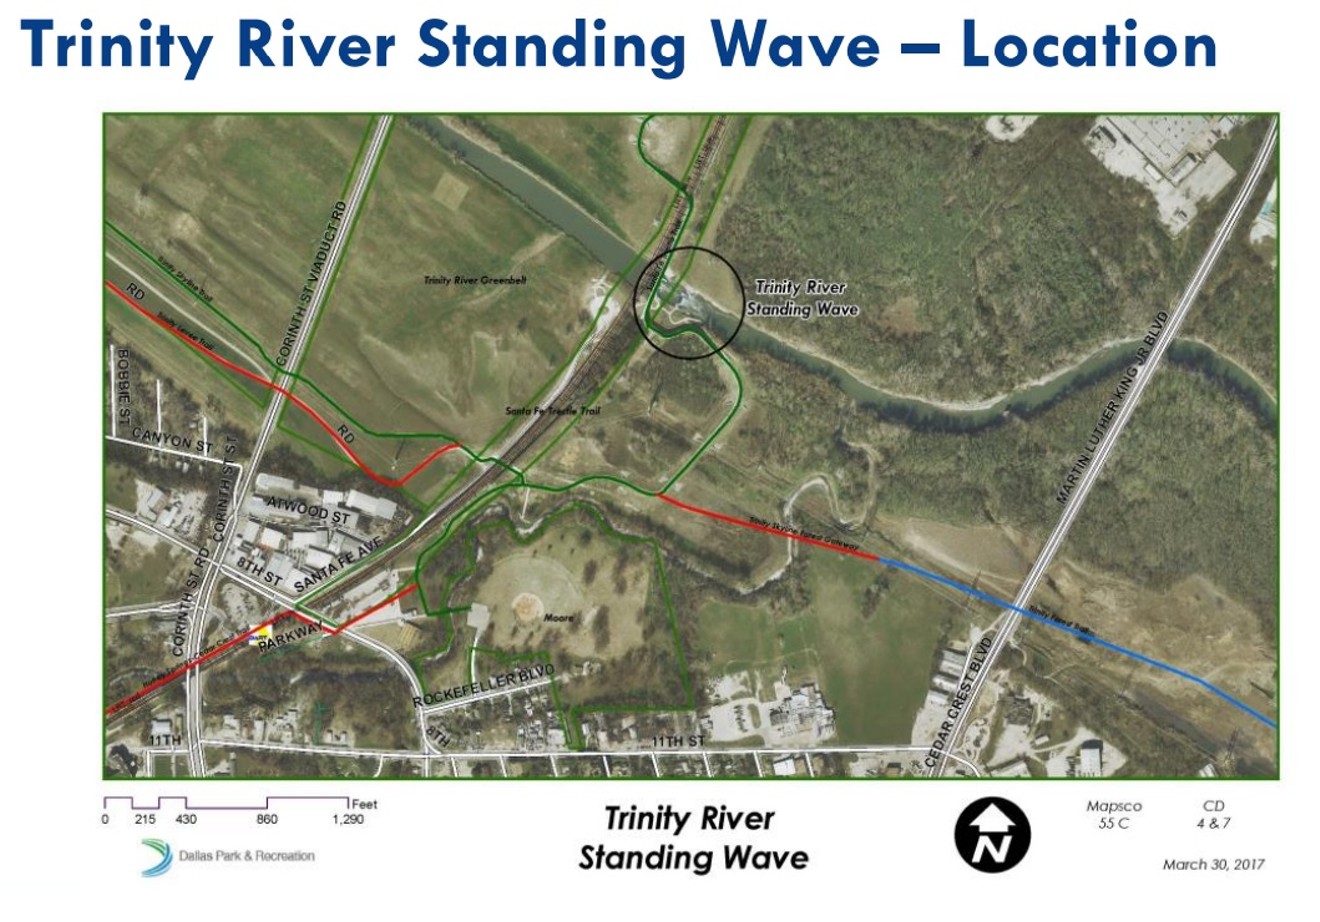 The failed whitewater feature is a mile and a half southeast of downtown where a DART bridge crosses the Trinity river.